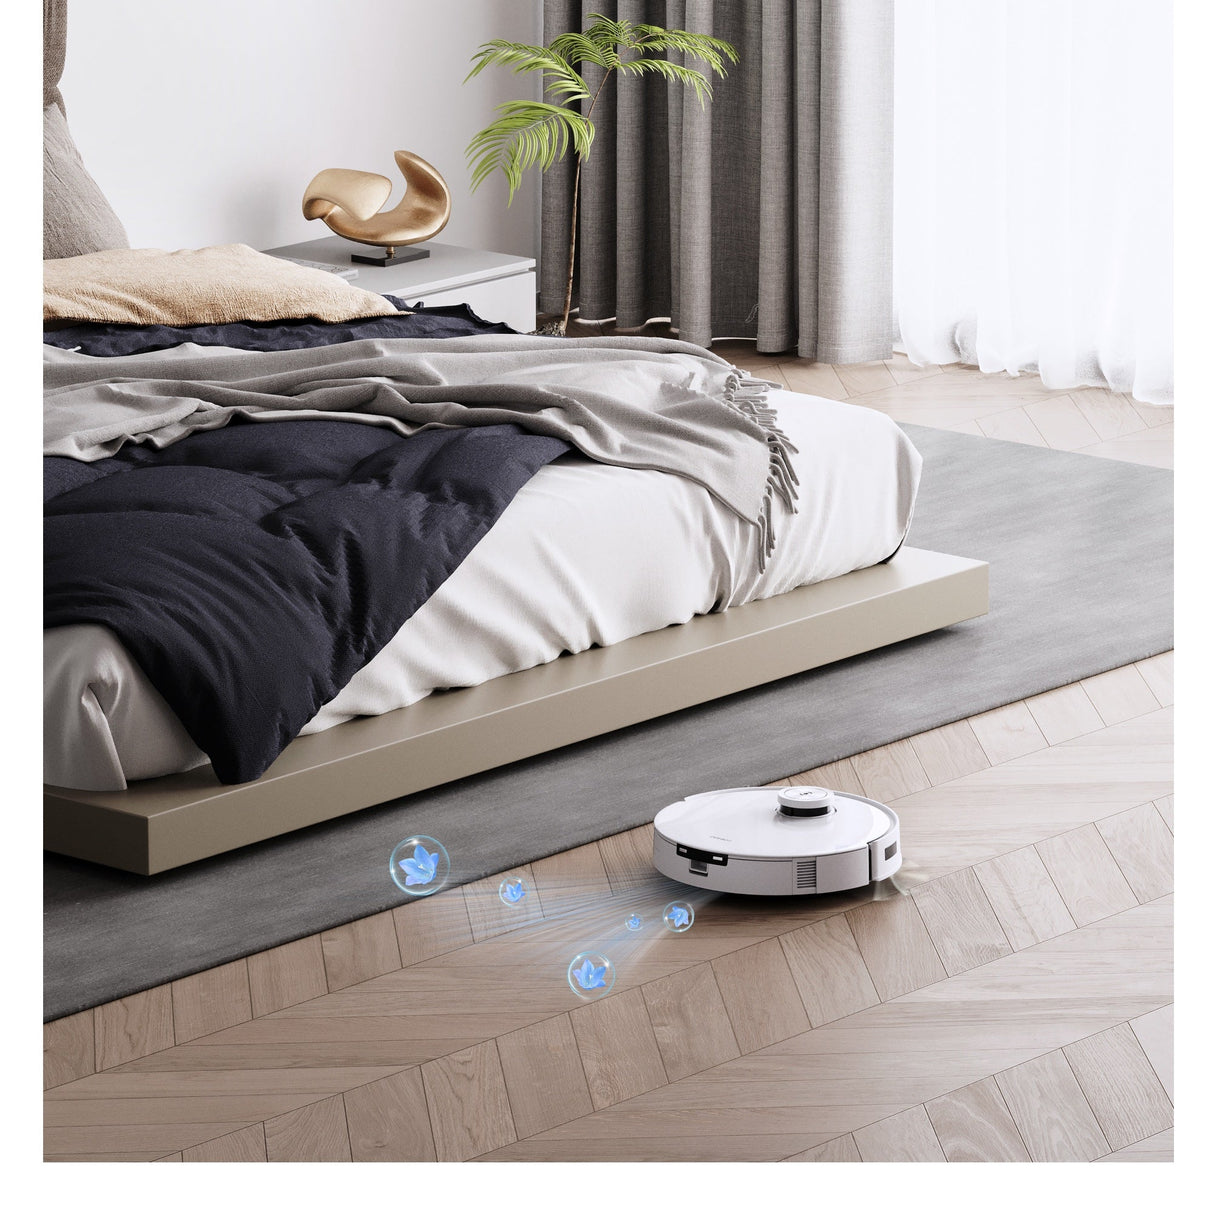 DEEBOT T10 PLUS Robot Vacuum Cleaner - 3000Pa, 260min Runtime -  UNBOXED DEAL